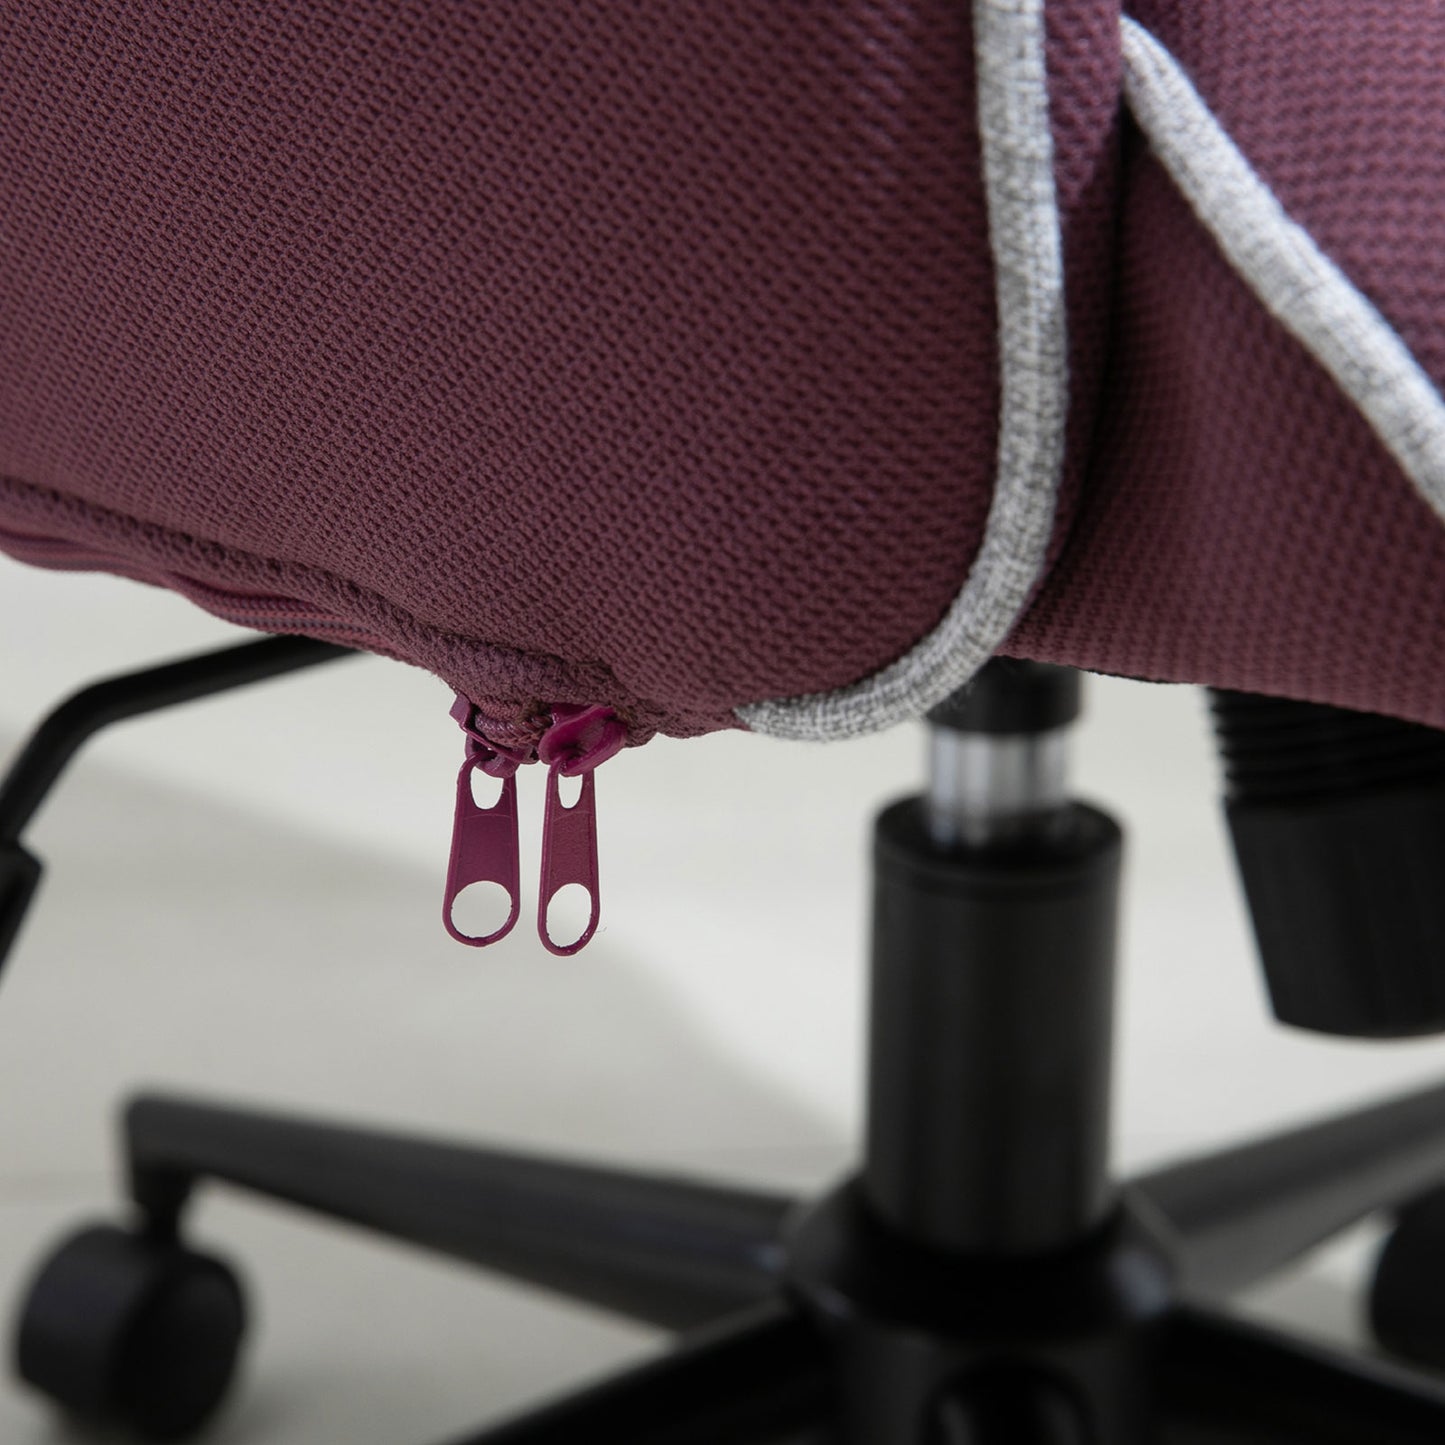 Vinsetto Linen Office Swivel Chair Mid Back Computer Desk Chair with Adjustable Seat, Arm - Purple